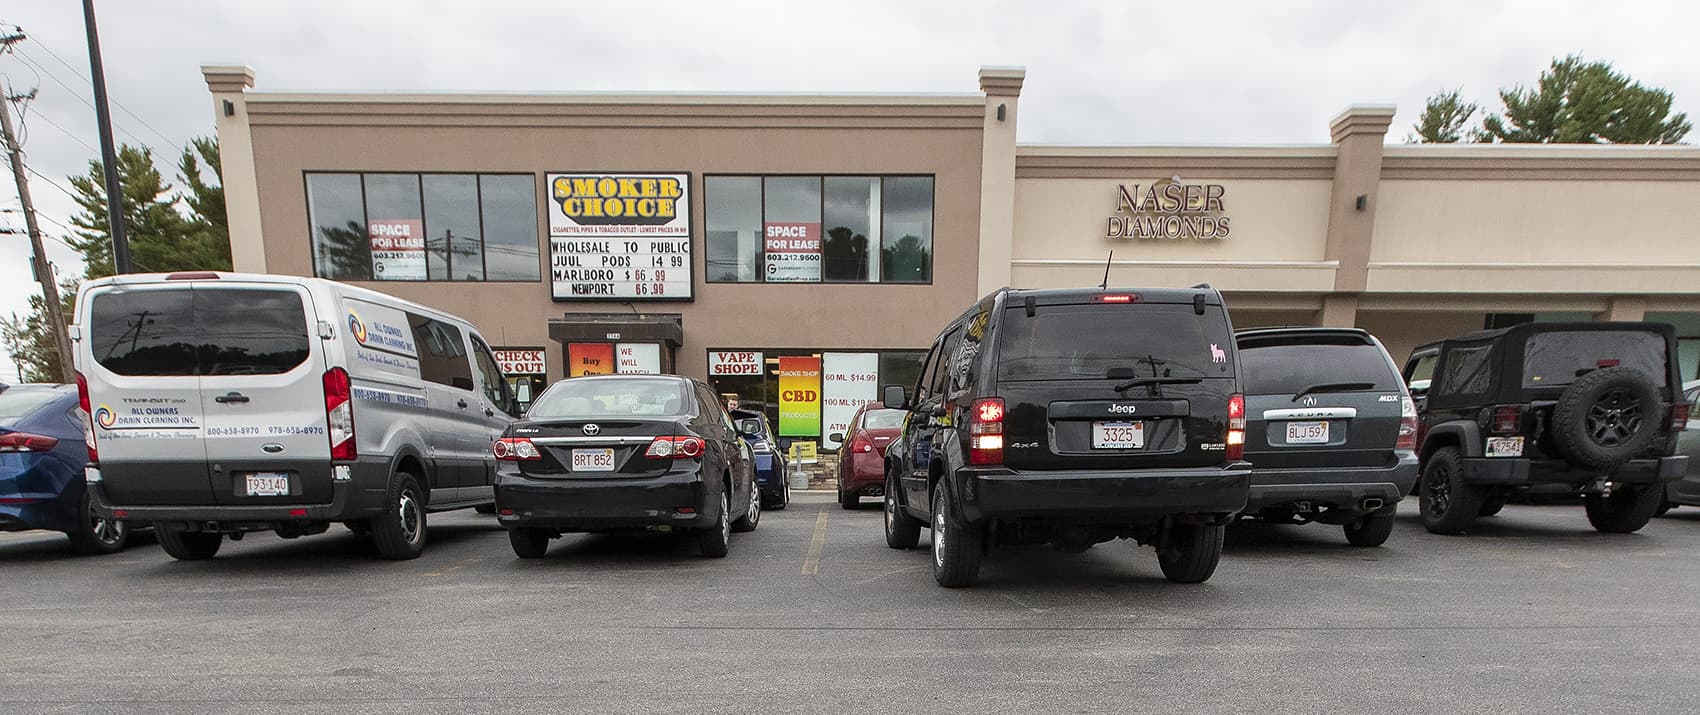 The parking lot in front of Smoker Choice in Salem, New Hampshire, was filled with cars from Massachusetts on a recent day. (Jesse Costa/WBUR)